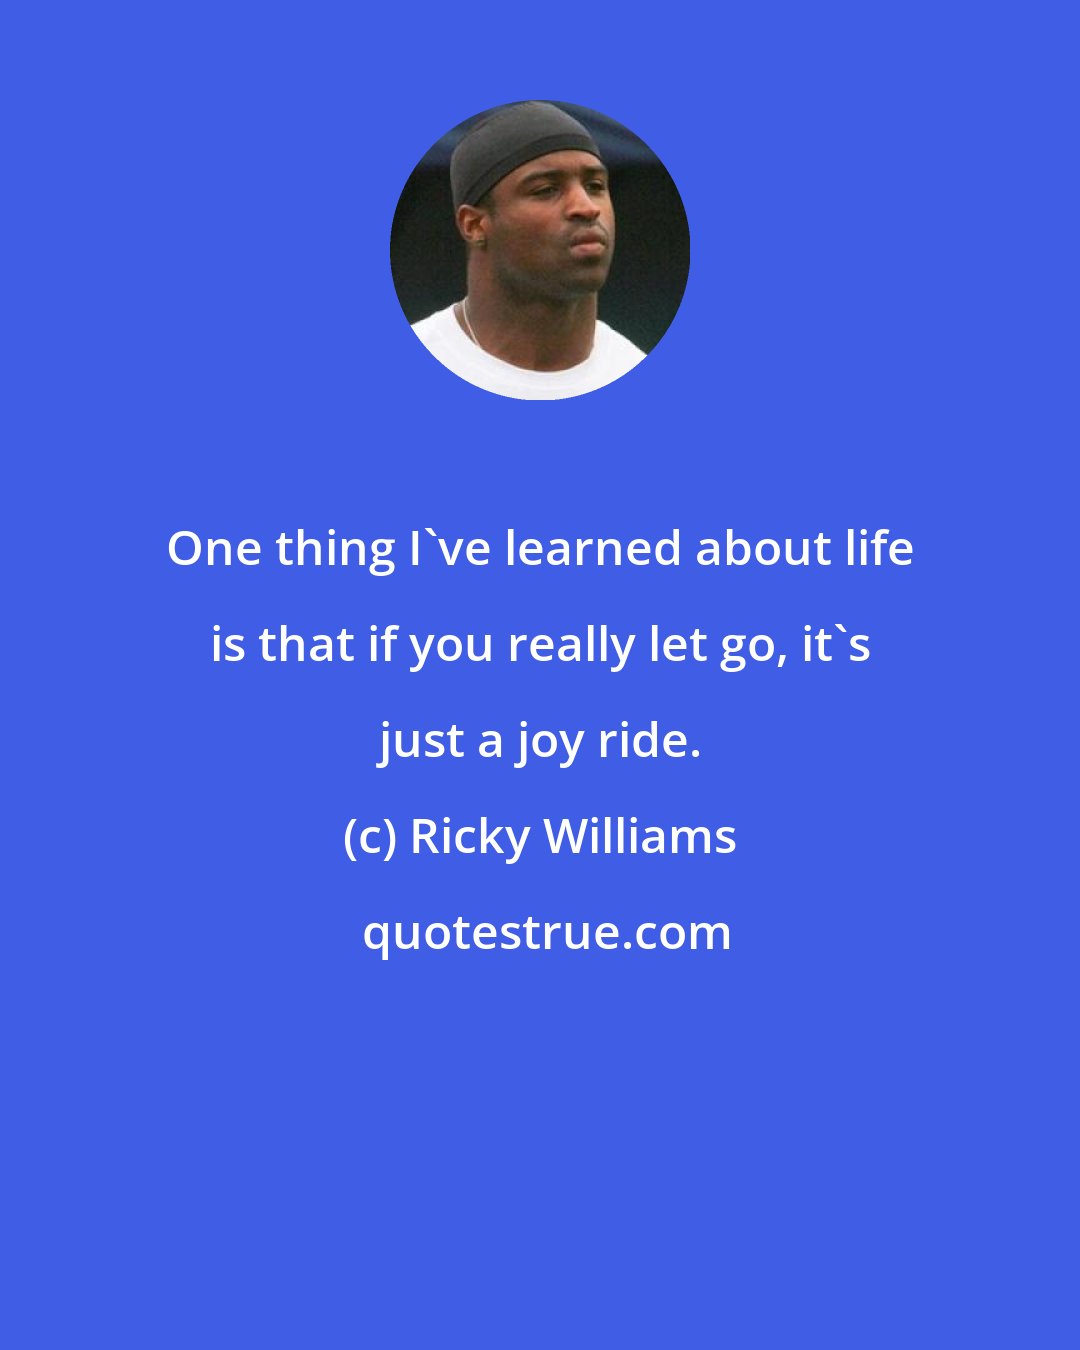 Ricky Williams: One thing I've learned about life is that if you really let go, it's just a joy ride.